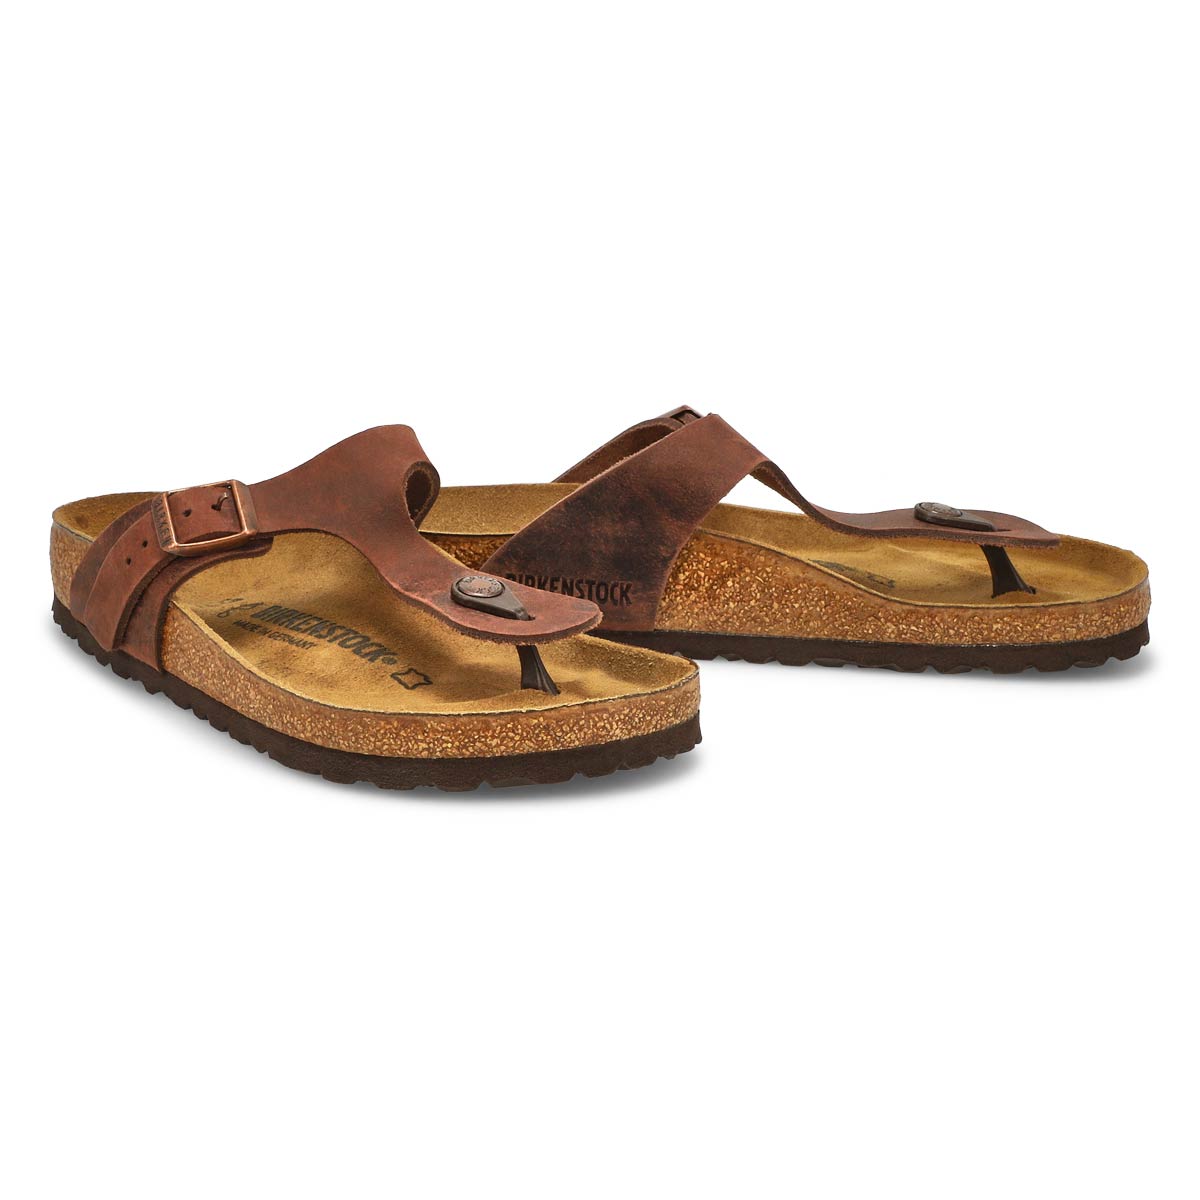 Birkenstock Women's Gizeh Oiled Leather Thong